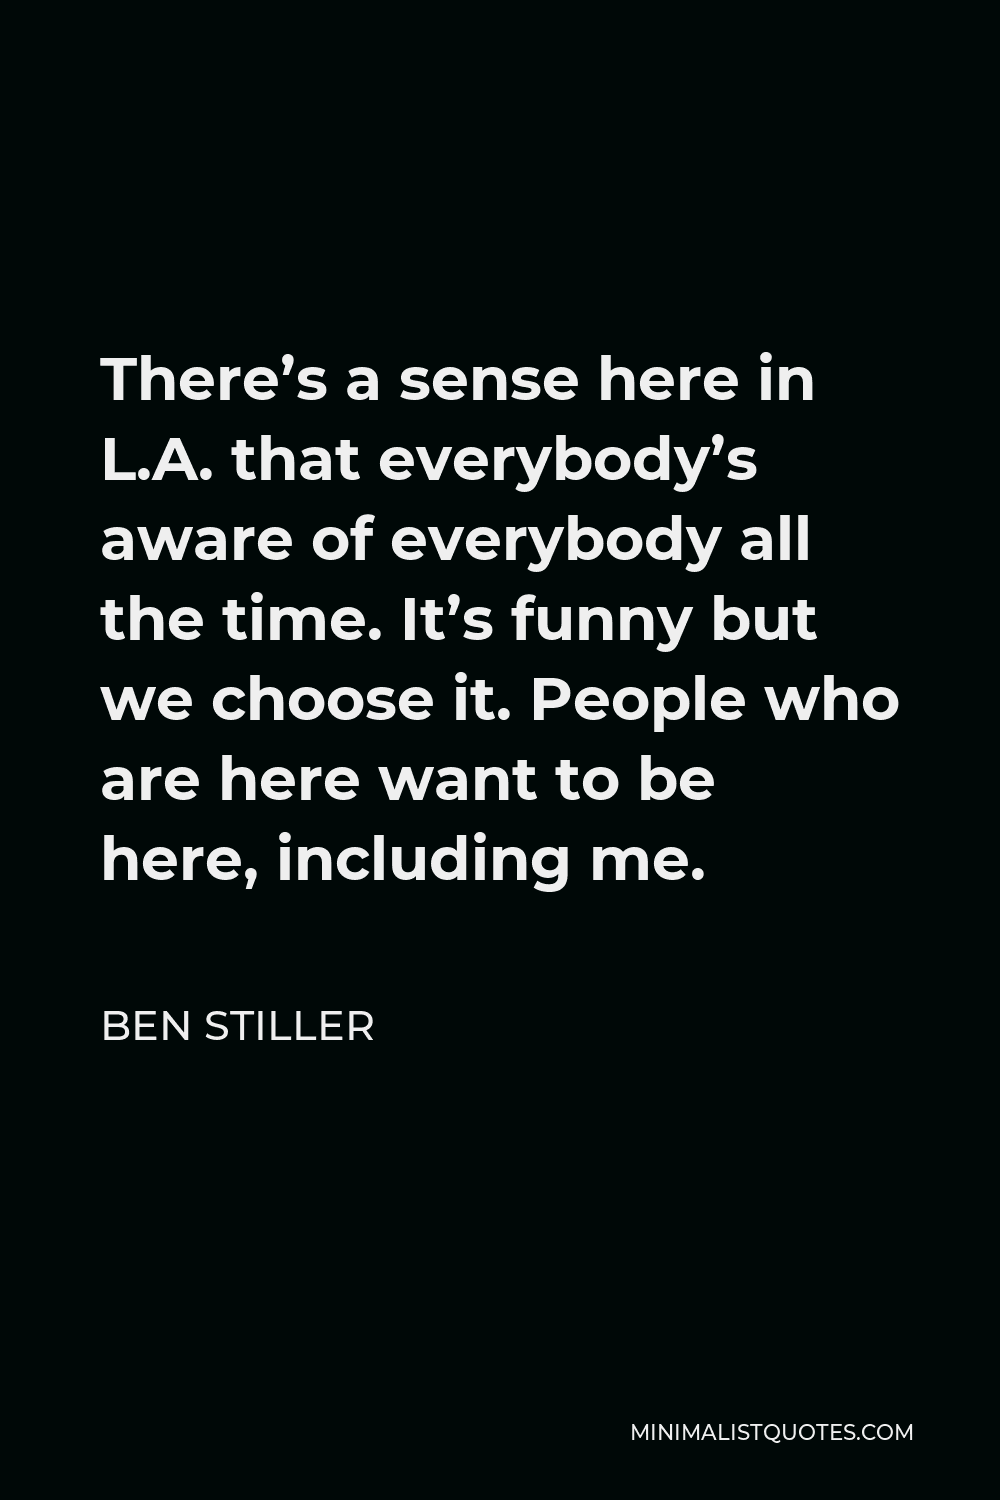 Ben Stiller Quote - There’s a sense here in L.A. that everybody’s aware of everybody all the time. It’s funny but we choose it. People who are here want to be here, including me.